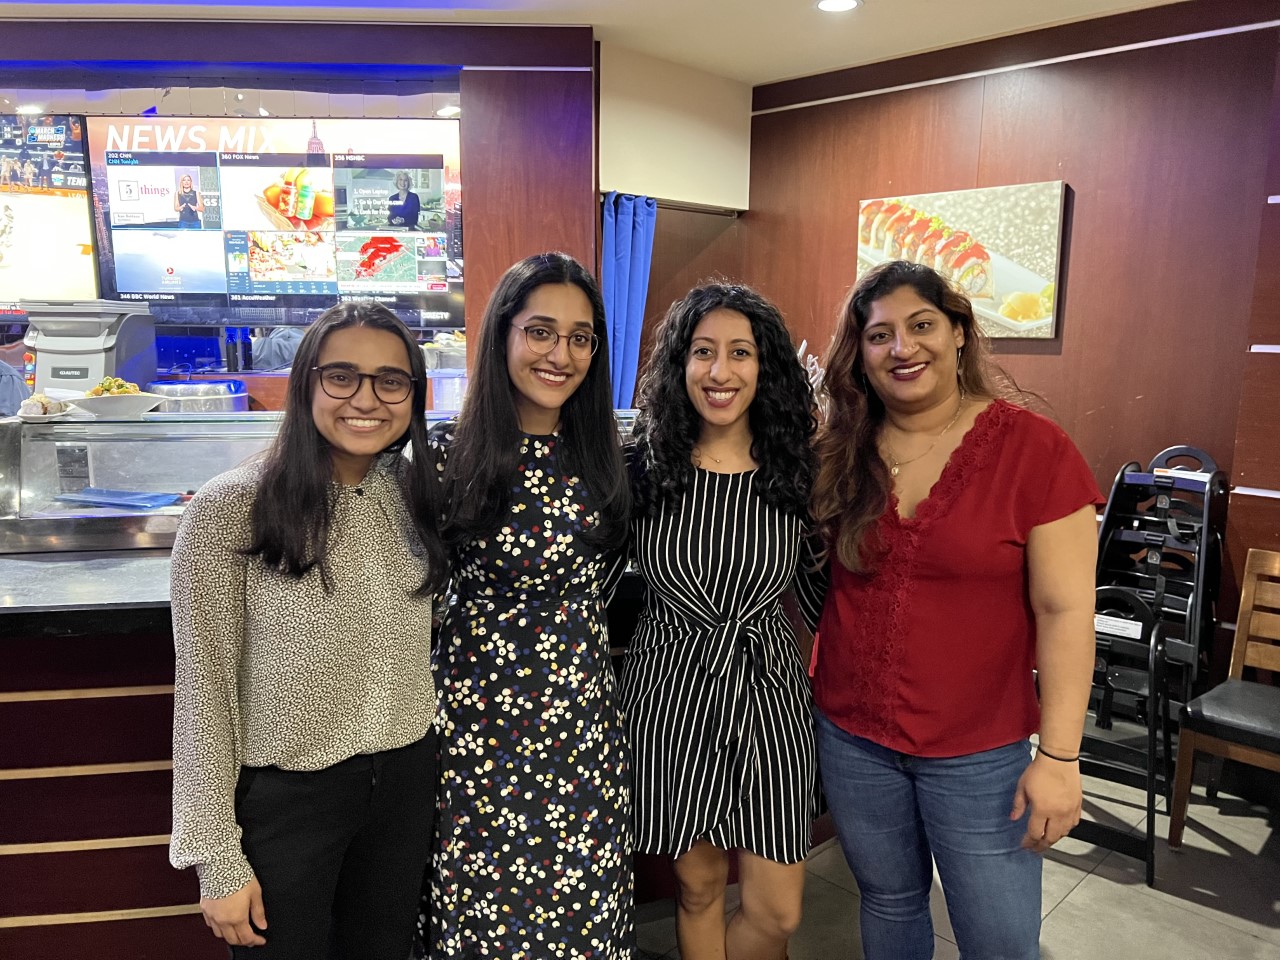 Saryu Sanghani (left), Anisa Bhatti (left center), Reema Malhotra, Associate Director Sexual Violence Prevention & Prevention at Penn (right center), and Viraj Patel, Director of Harnwell College House at Penn (right) at the NAPSA Desi meet-up